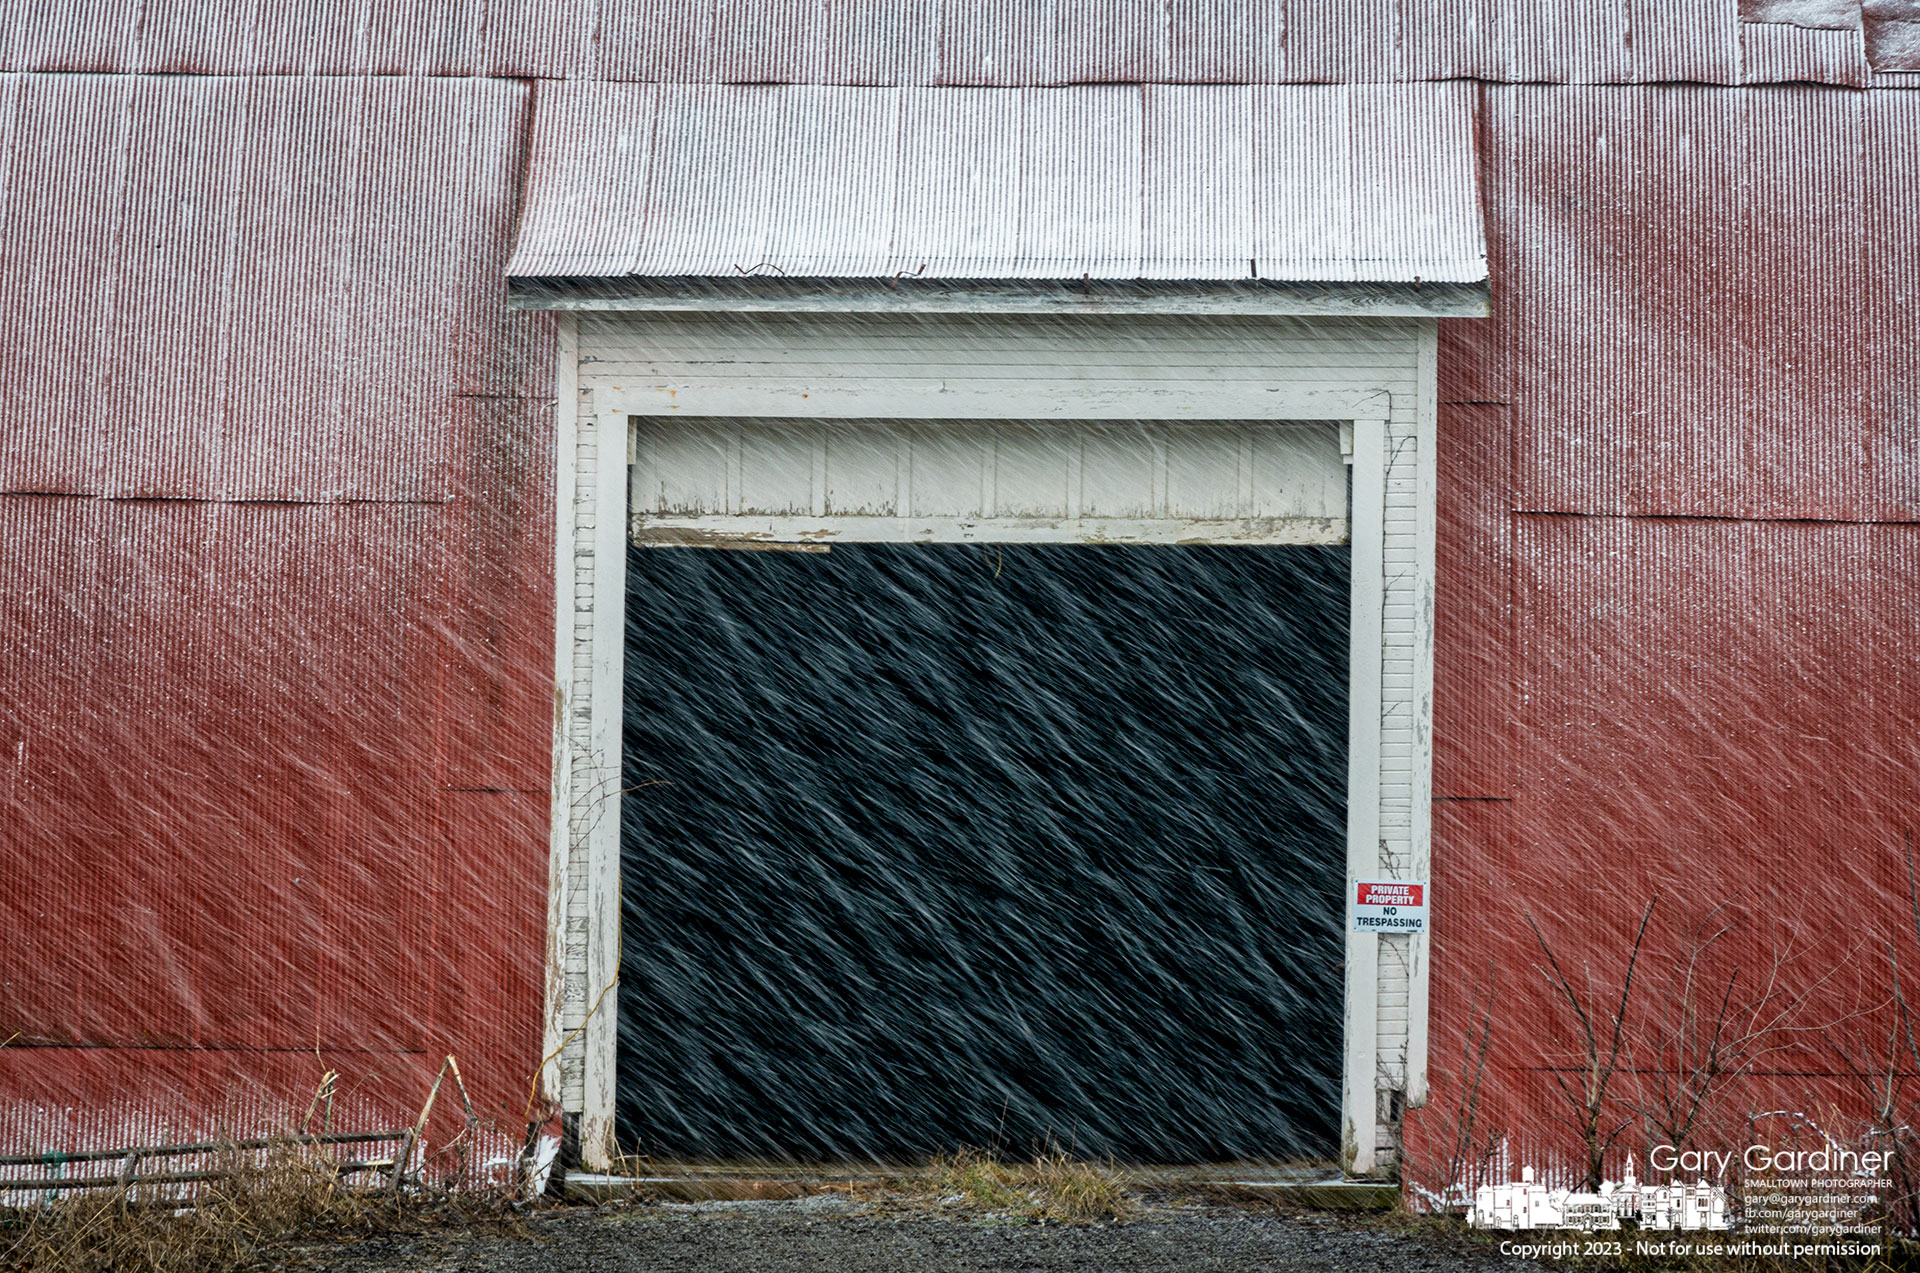 Afternoon winter snow flurries fly past the open door and begin to coat the barn at the Braun Farm. My Final Photo for January 30, 2023.